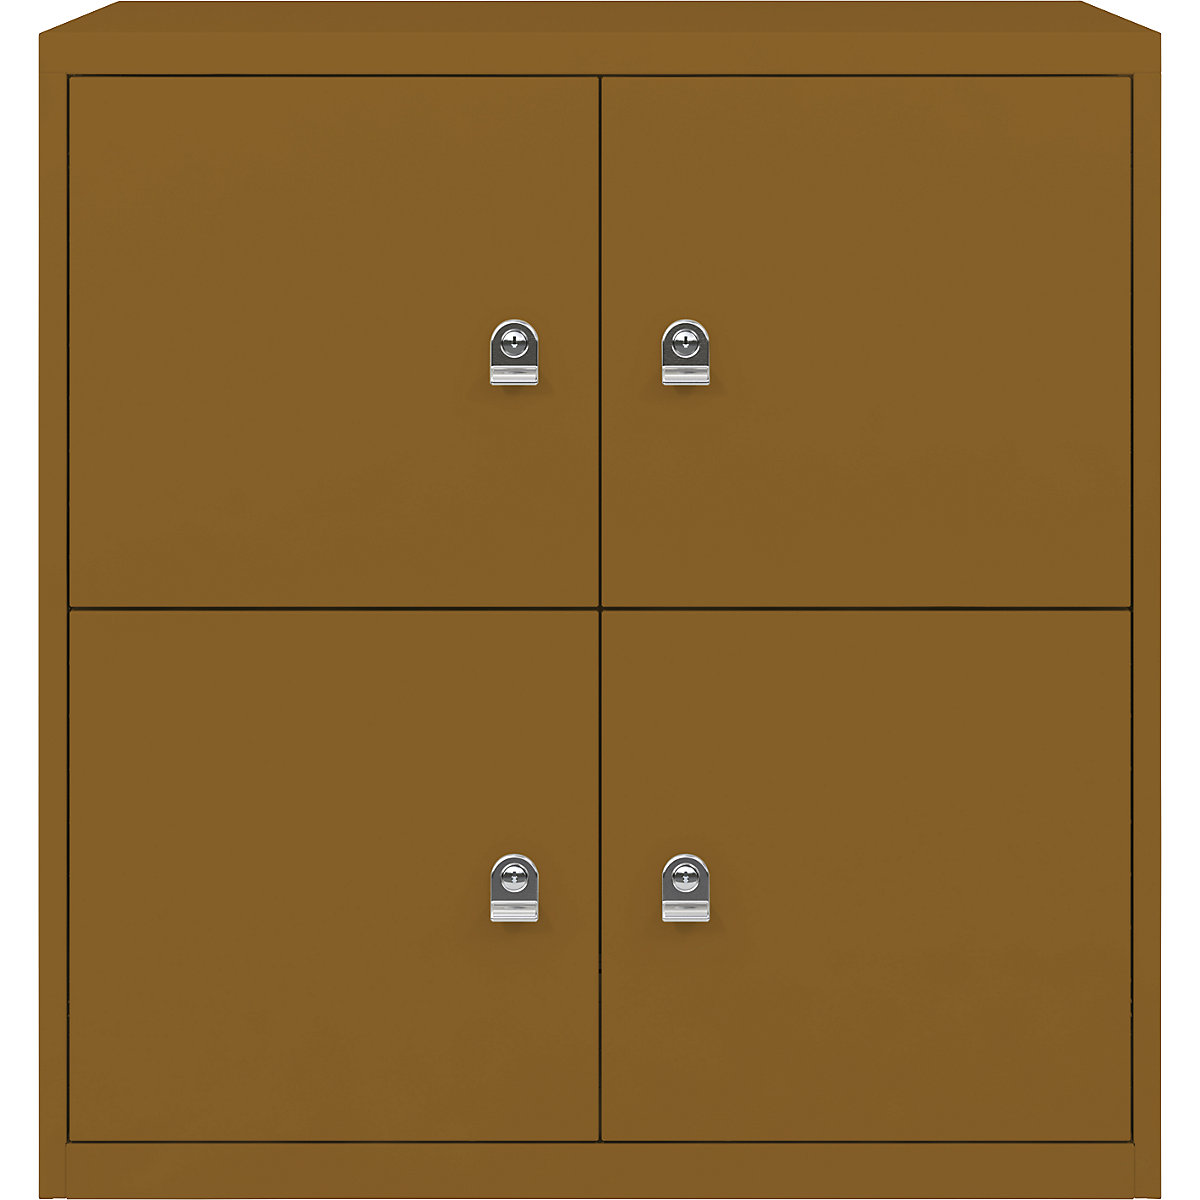 LateralFile™ lodge – BISLEY, with 4 lockable compartments, height 375 mm each, dijon